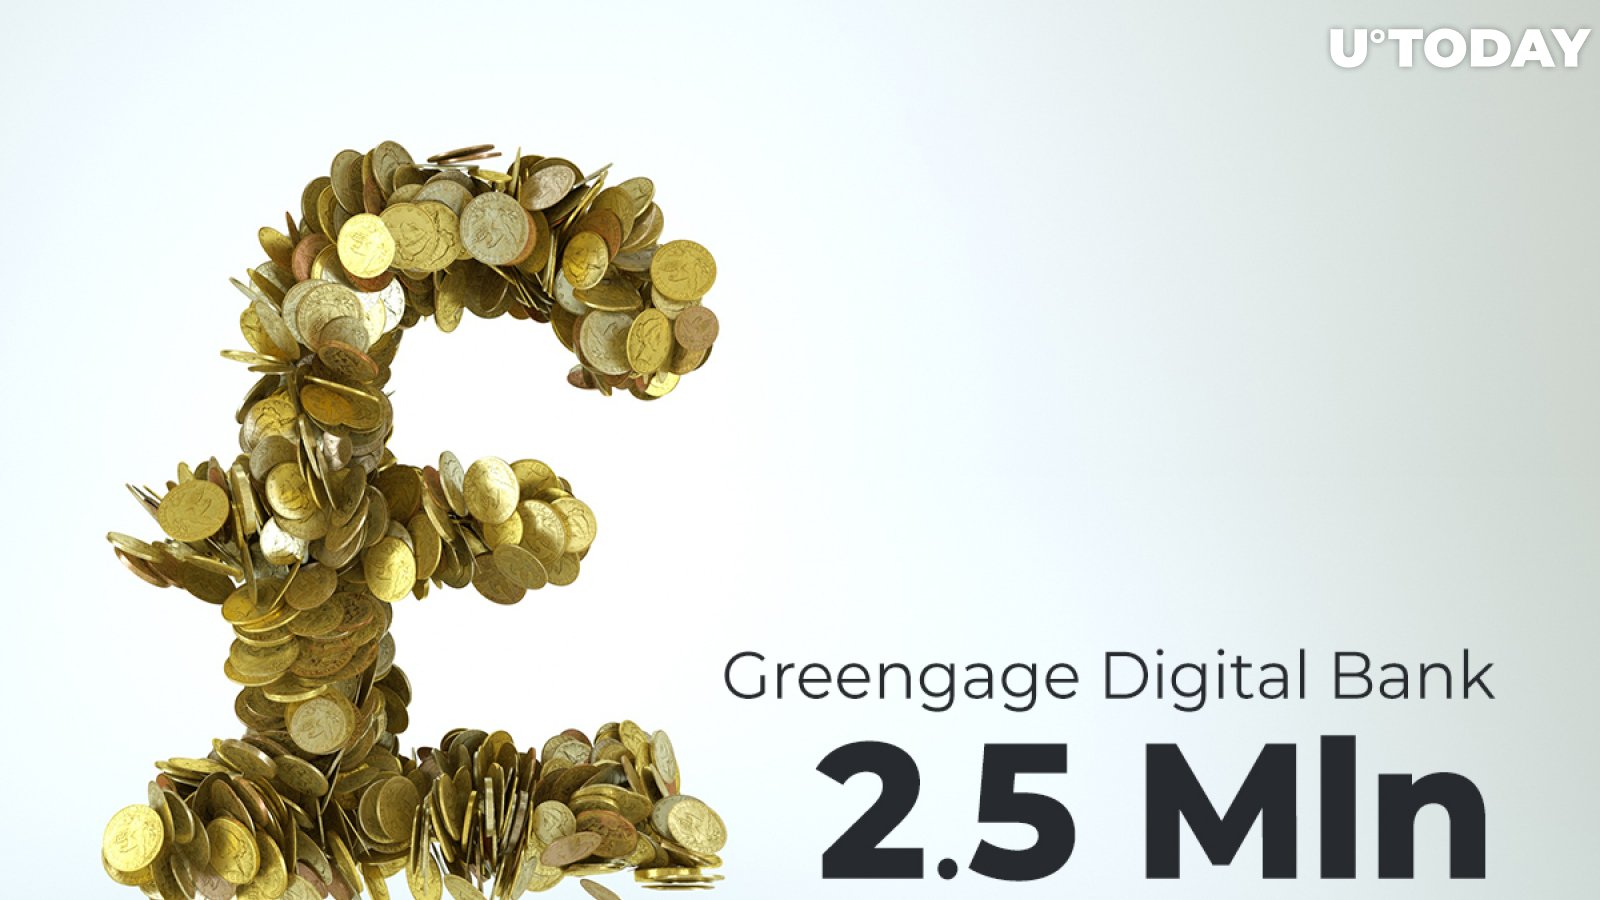 Greengage Digital Bank Raises £2.5 Million from IOV Labs, Announces Support for RSK Blockchain